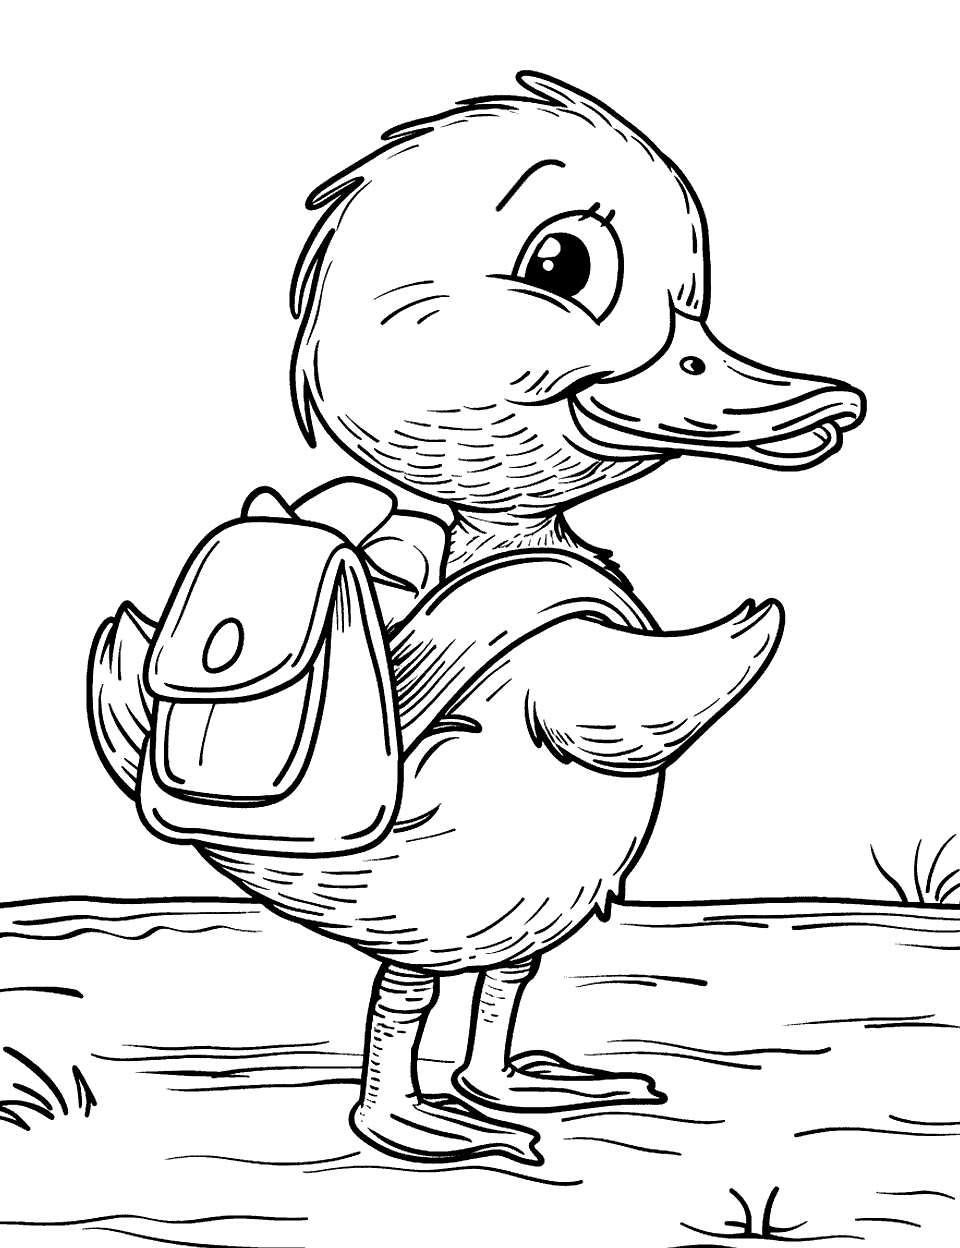 Duck with a Backpack Going to School Coloring Page - A cheerful duck wearing a backpack walking to school with excitement.